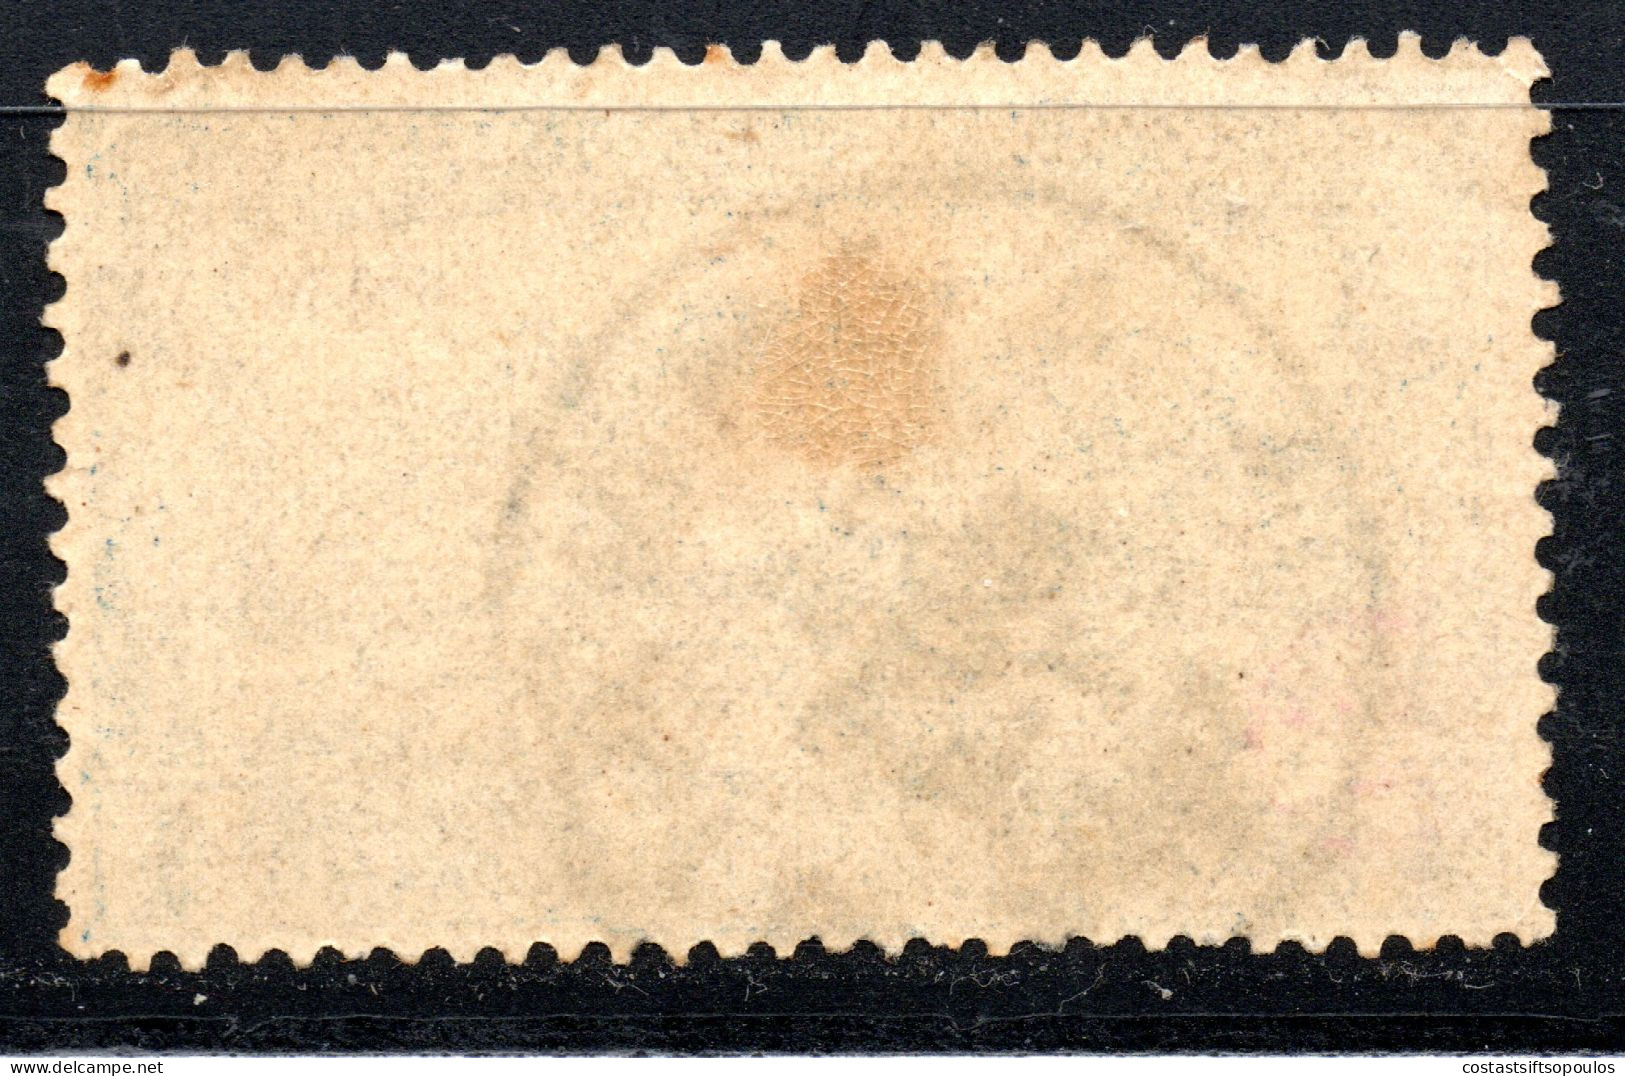 2964.GREECE. 1896 1DR. OLYMPIC GAMES STADIUM 25/3/1896 F.D.CANCEL - Used Stamps